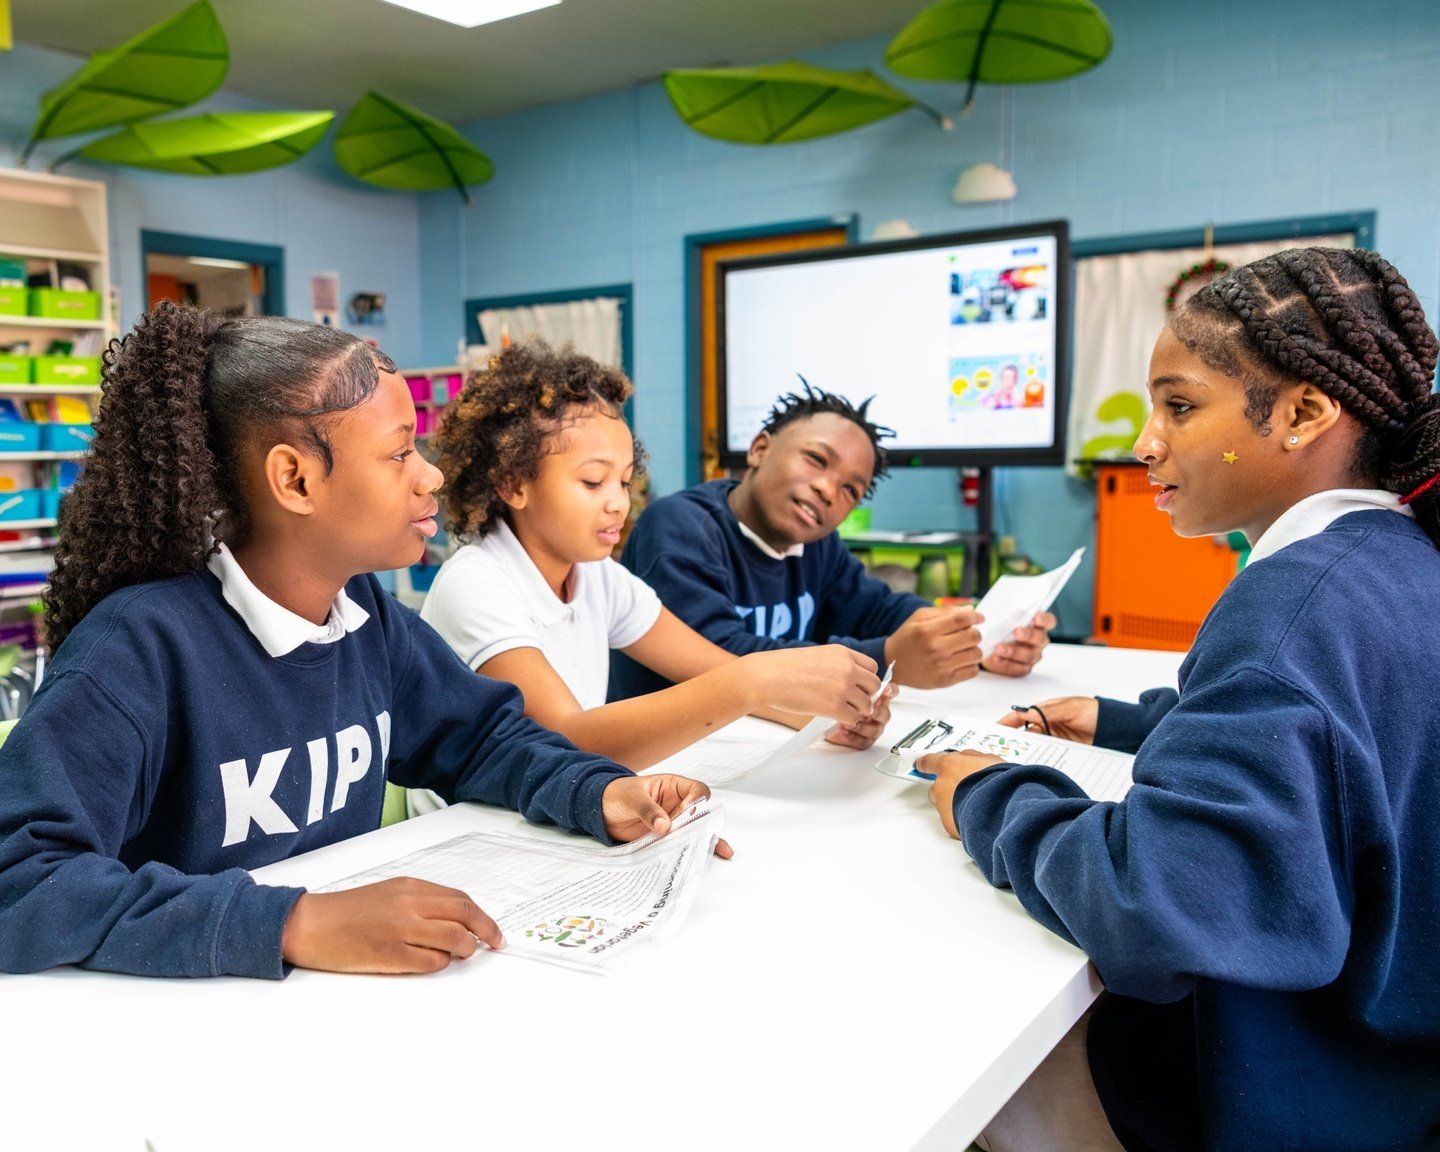 We believe our priorities, which put our KIPPsters first at every step, have a transformative impact on student outcomes. They include: 

✏️ Rigorous instruction for all
🏫 College and career readiness
🌎 Affirming school culture
🤝 Engaged families 